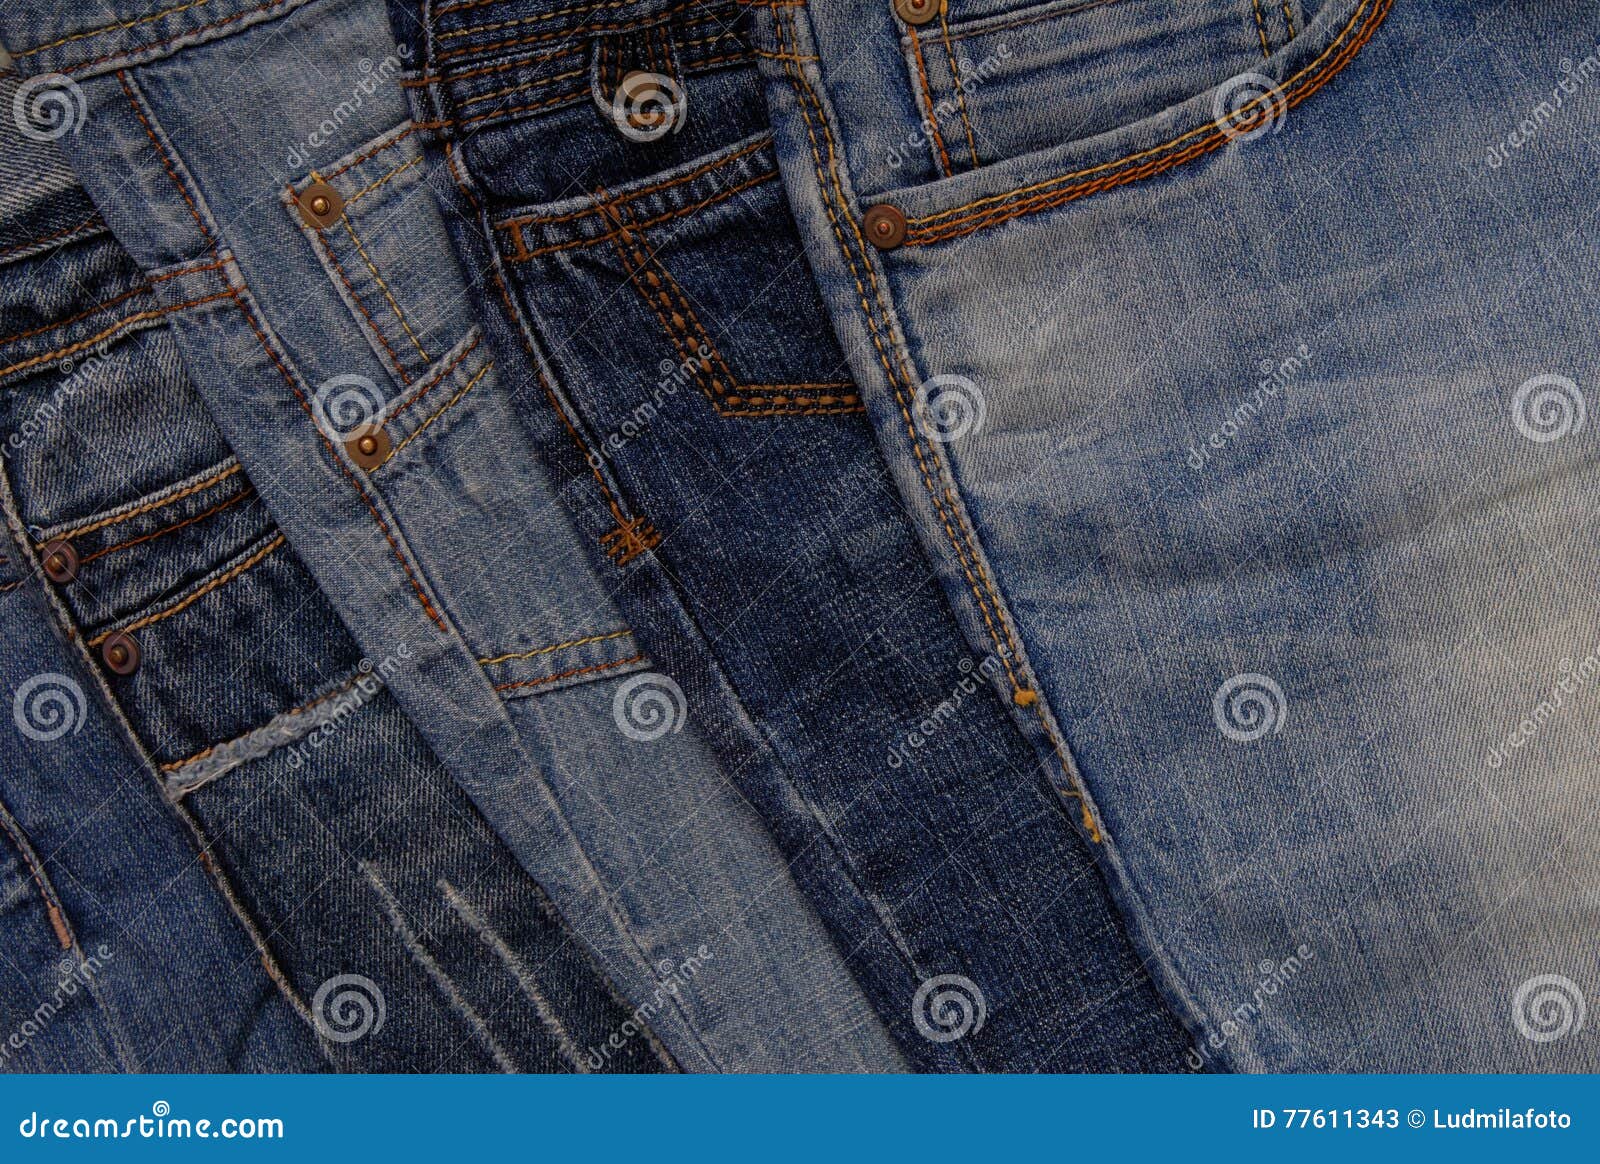 Blue Denim Background, Pile of Jeans Stock Image - Image of clothes ...